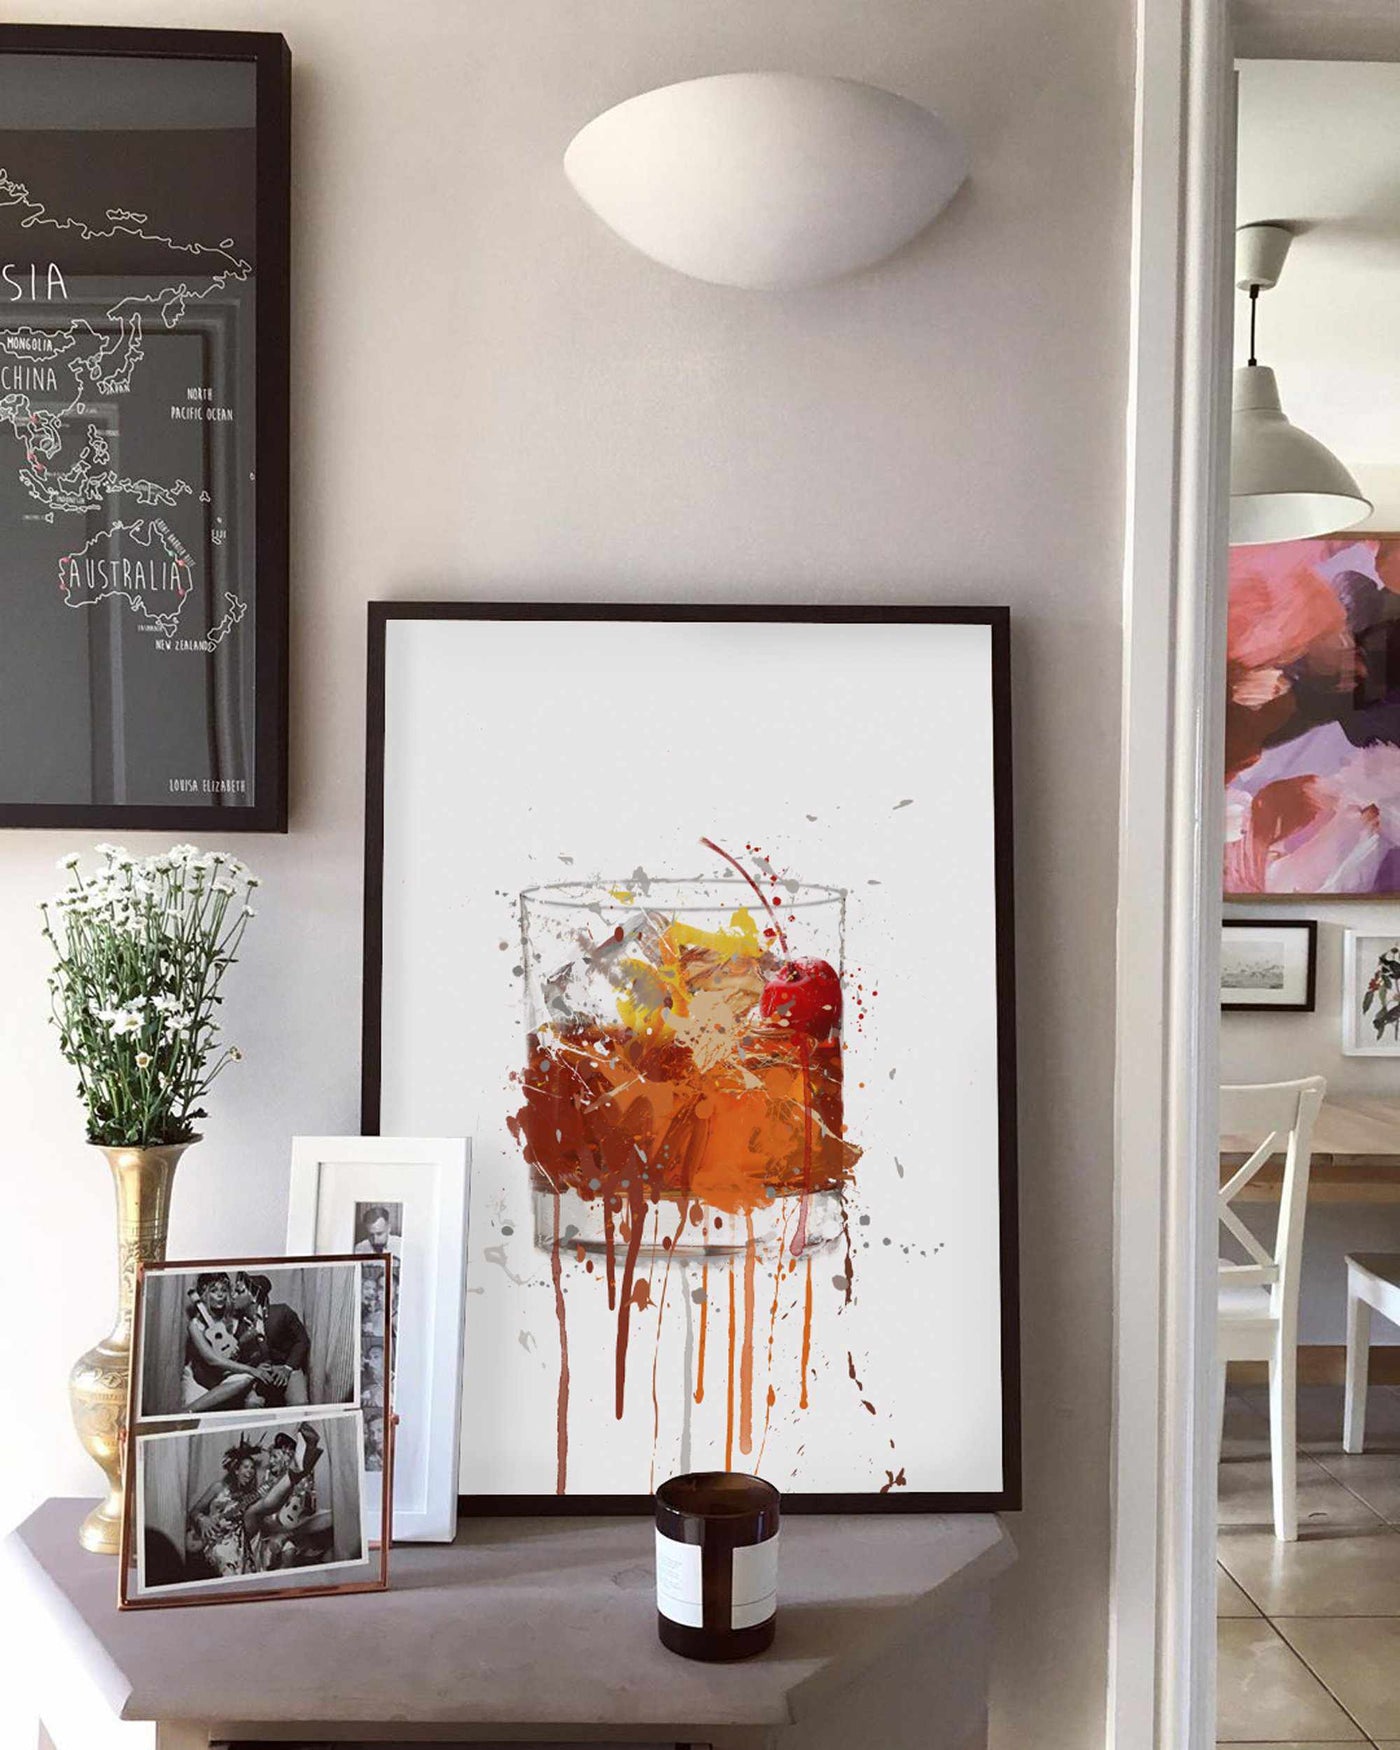 Old Fashioned Cocktail Wall Art Print